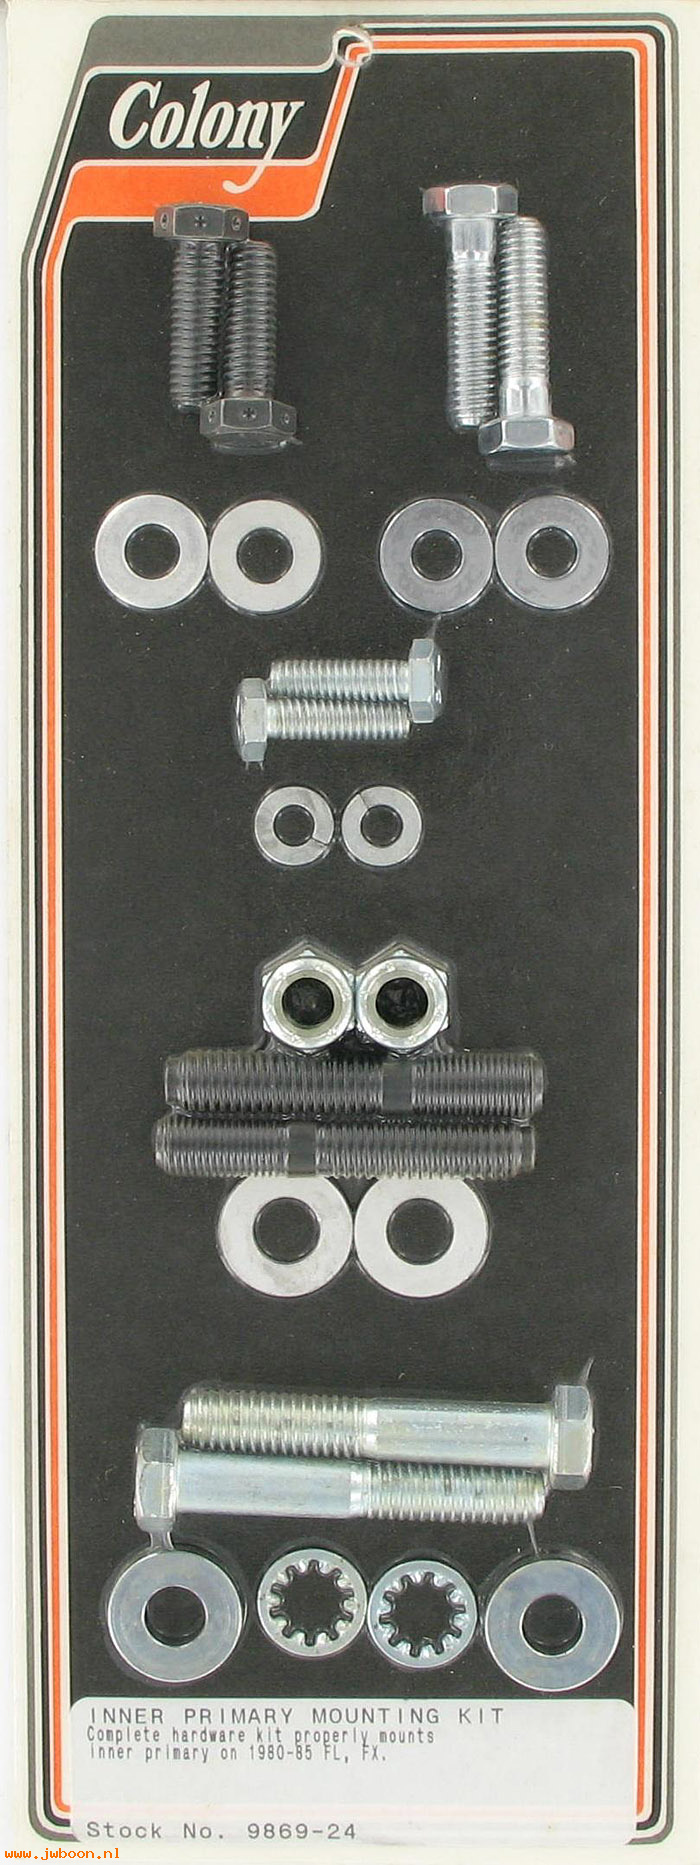 C 9869-24 (16830-54 / 4021): Inner primary mounting kit - Big Twins FL, FX '80-'85, in stock